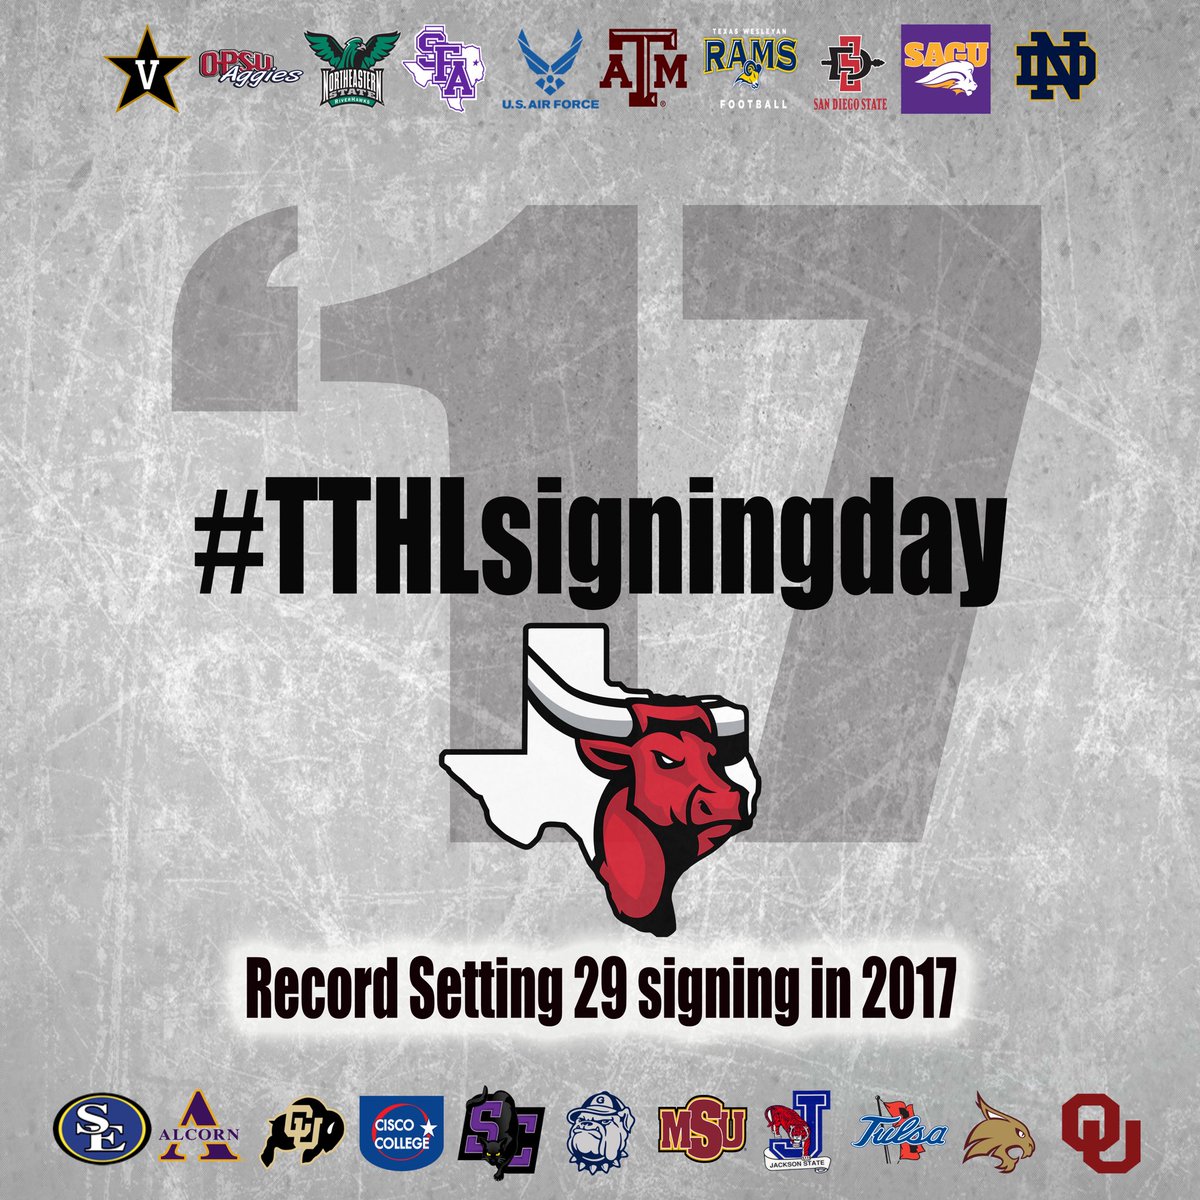 @CHLonghorns ....are you kidding me??? 29 football players signed today!!! TTHL